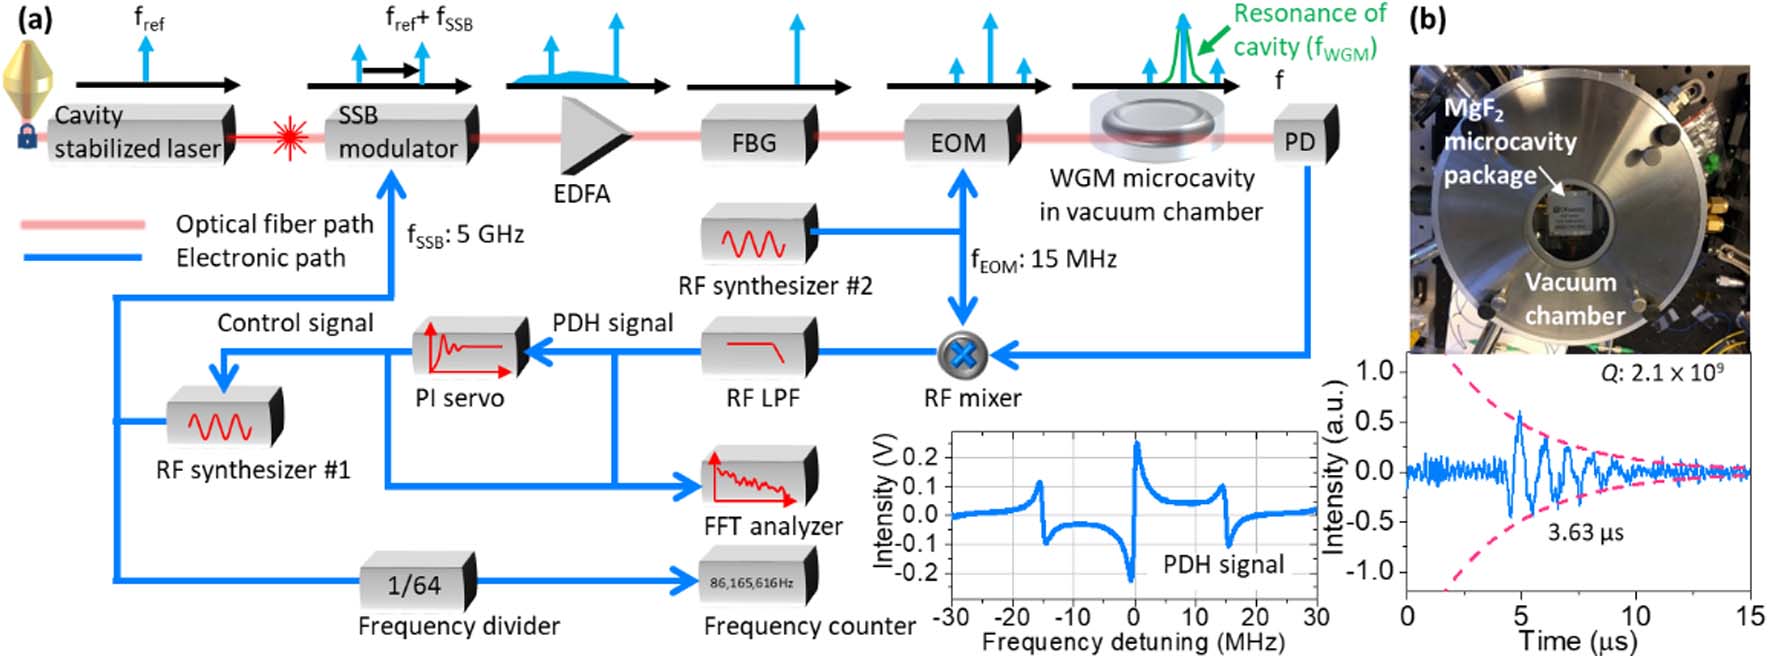 Sub-femtometer/Hz1/2 displacement measurement setup. (a) The FP cavity stabilized laser provides the frequency reference point. The PDH scheme generates the error signal to synchronize the reference laser frequency (fref) with the MgF2 WGM microcavity resonance mode (fWGM) using the SSB modulator. Fluctuation of the WGM microcavity is recorded by the FFT spectrum analyzer and frequency counter. The inset shows the PDH error signal near the MgF2 microcavity resonance. SSB modulator, single-sideband modulator; EDFA, erbium-doped fiber amplifier; FBG, fiber Bragg grating; EOM, electro-optic modulator; WGM microcavity, whispering-gallery-mode microcavity; PD, photodetector; RF synthesizer, radio-frequency synthesizer; RF LPF, radio-frequency low-pass filter; PI servo, proportional-integral servo controller. (b) Upper figure shows vacuum chamber system. Lower figure shows the optical ring-down measurement of the MgF2 microcavity.